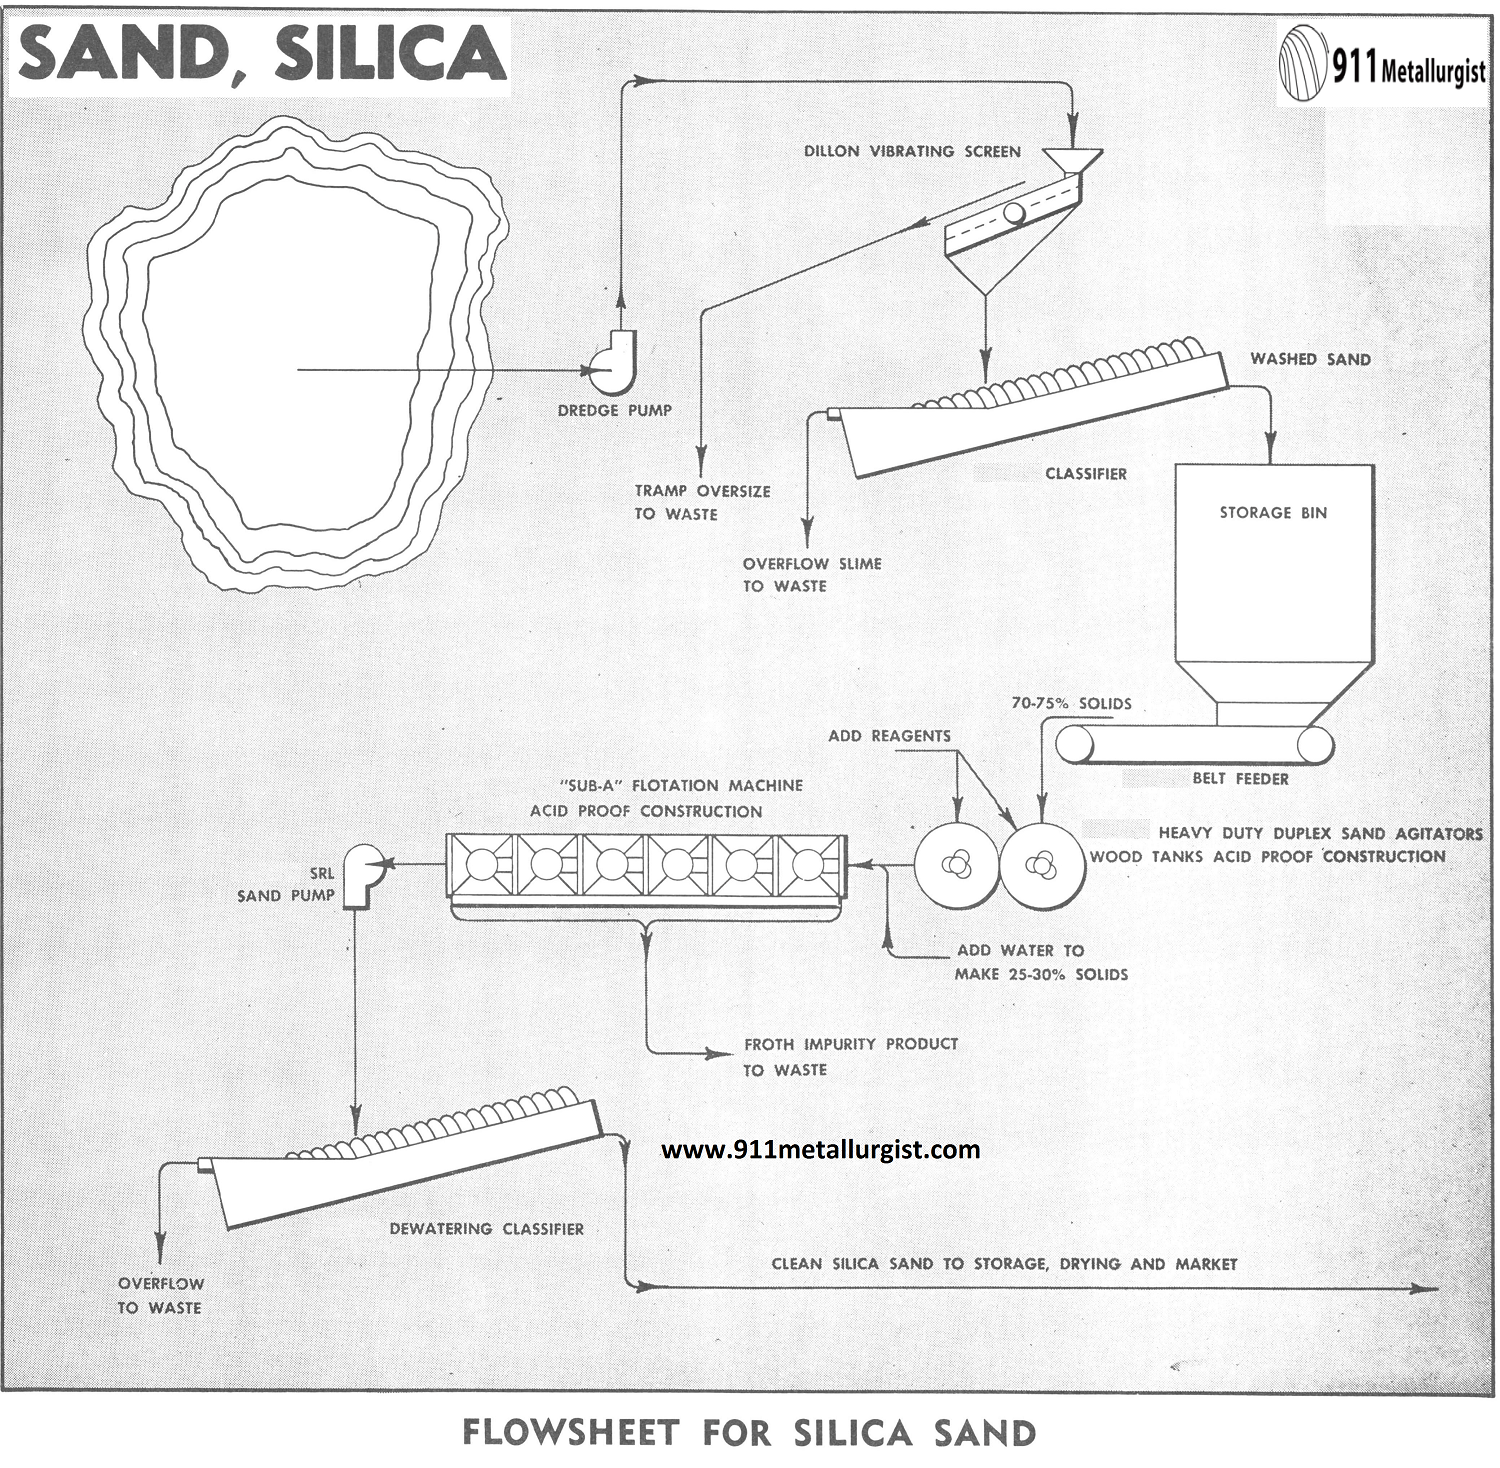 Flowsheet for Silica Sand